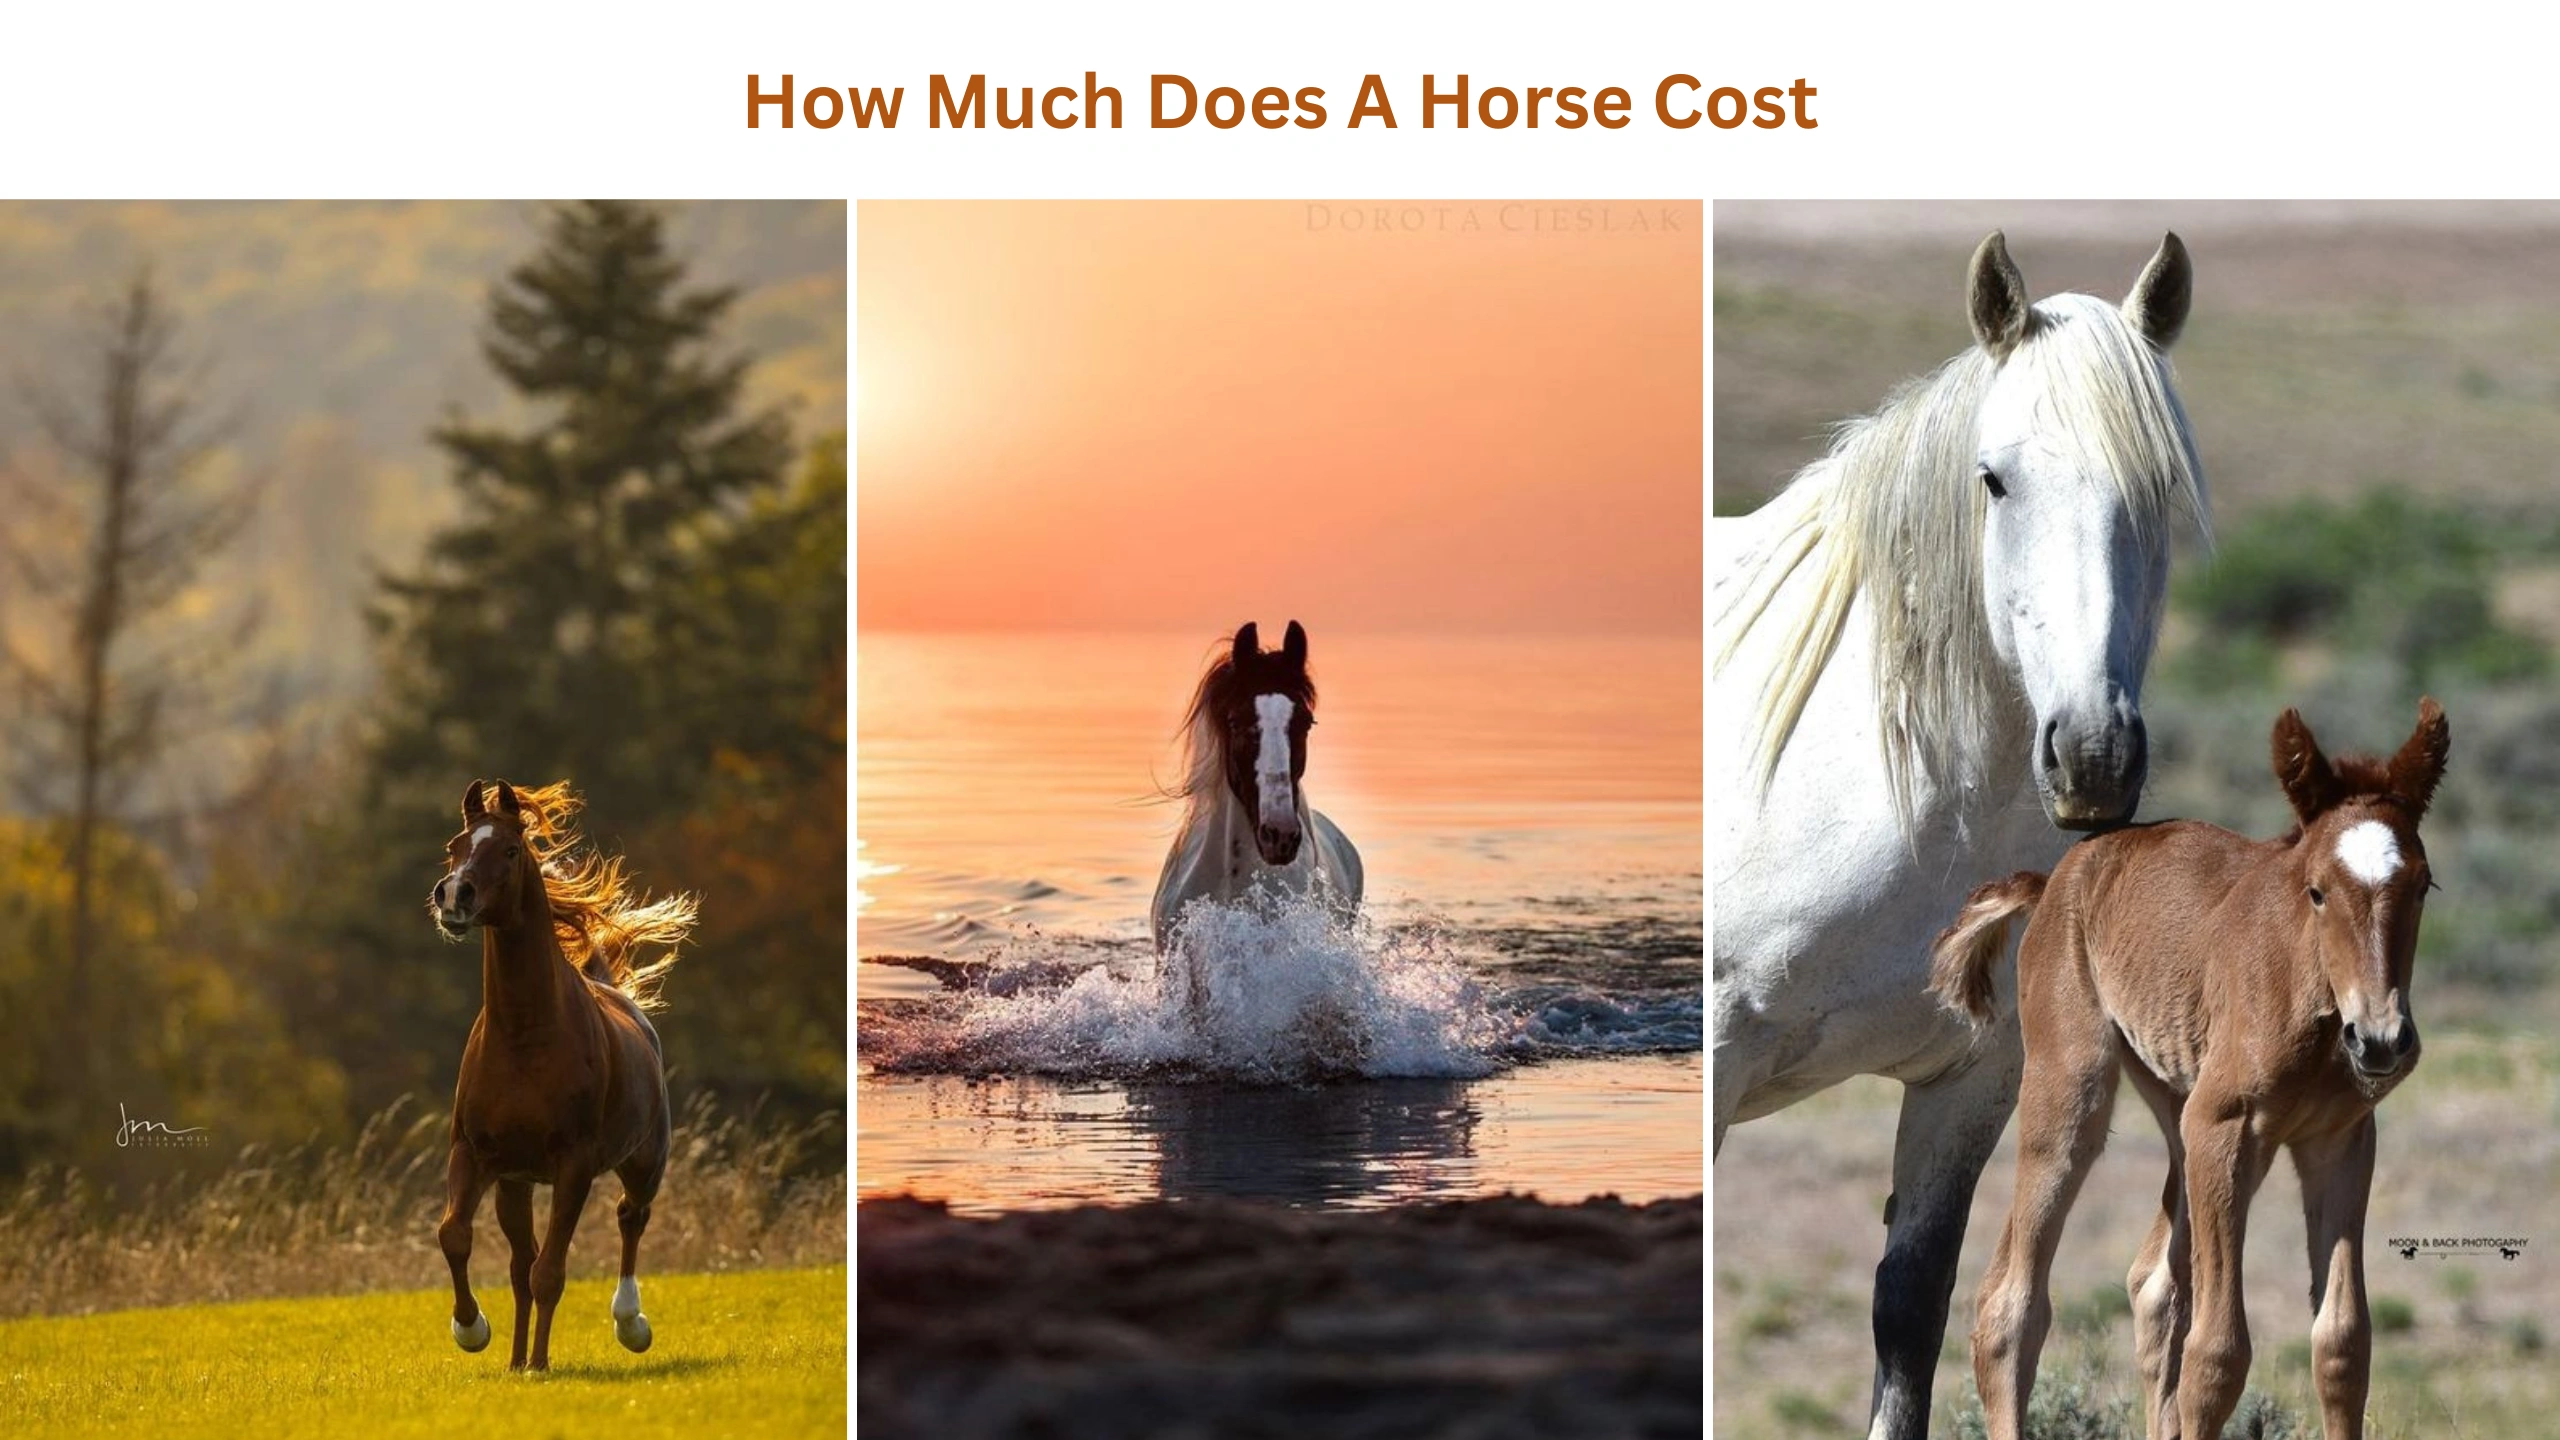 How much does a horse cost